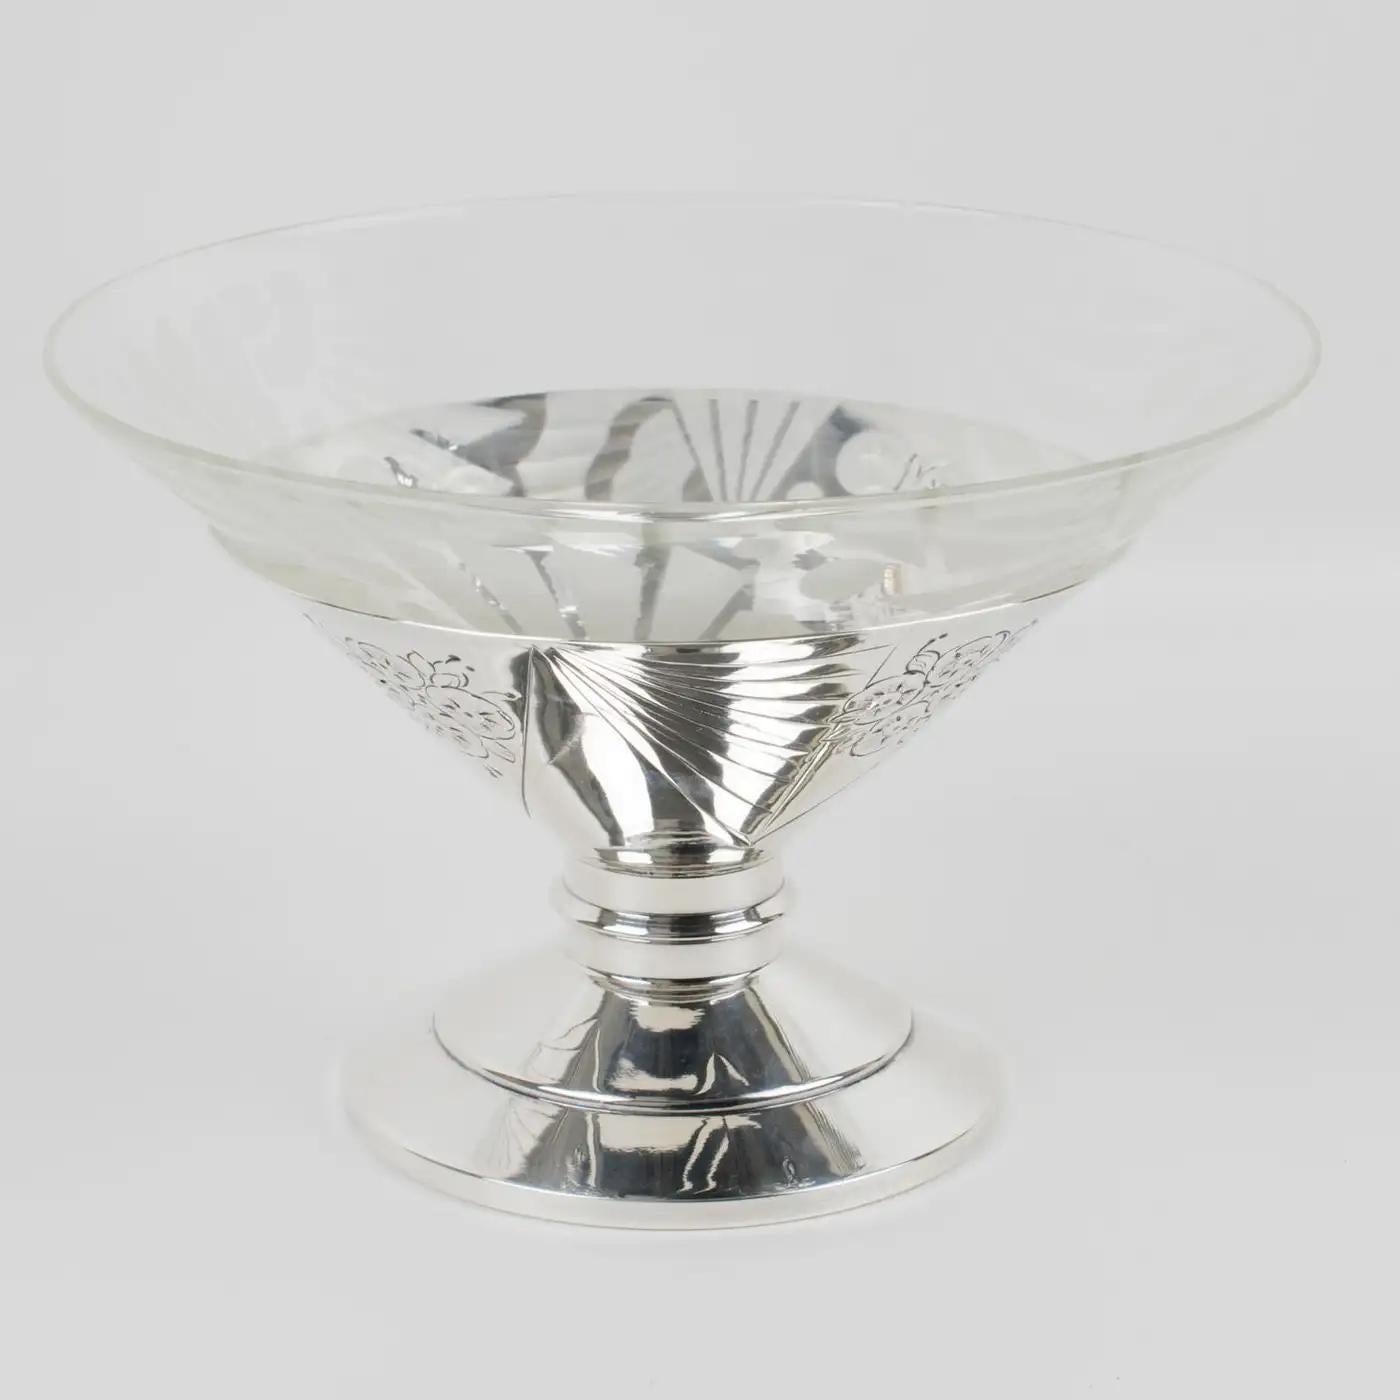 Art Deco Silver Plate and Etched Glass Centerpiece Bowl, 1930s For Sale 1